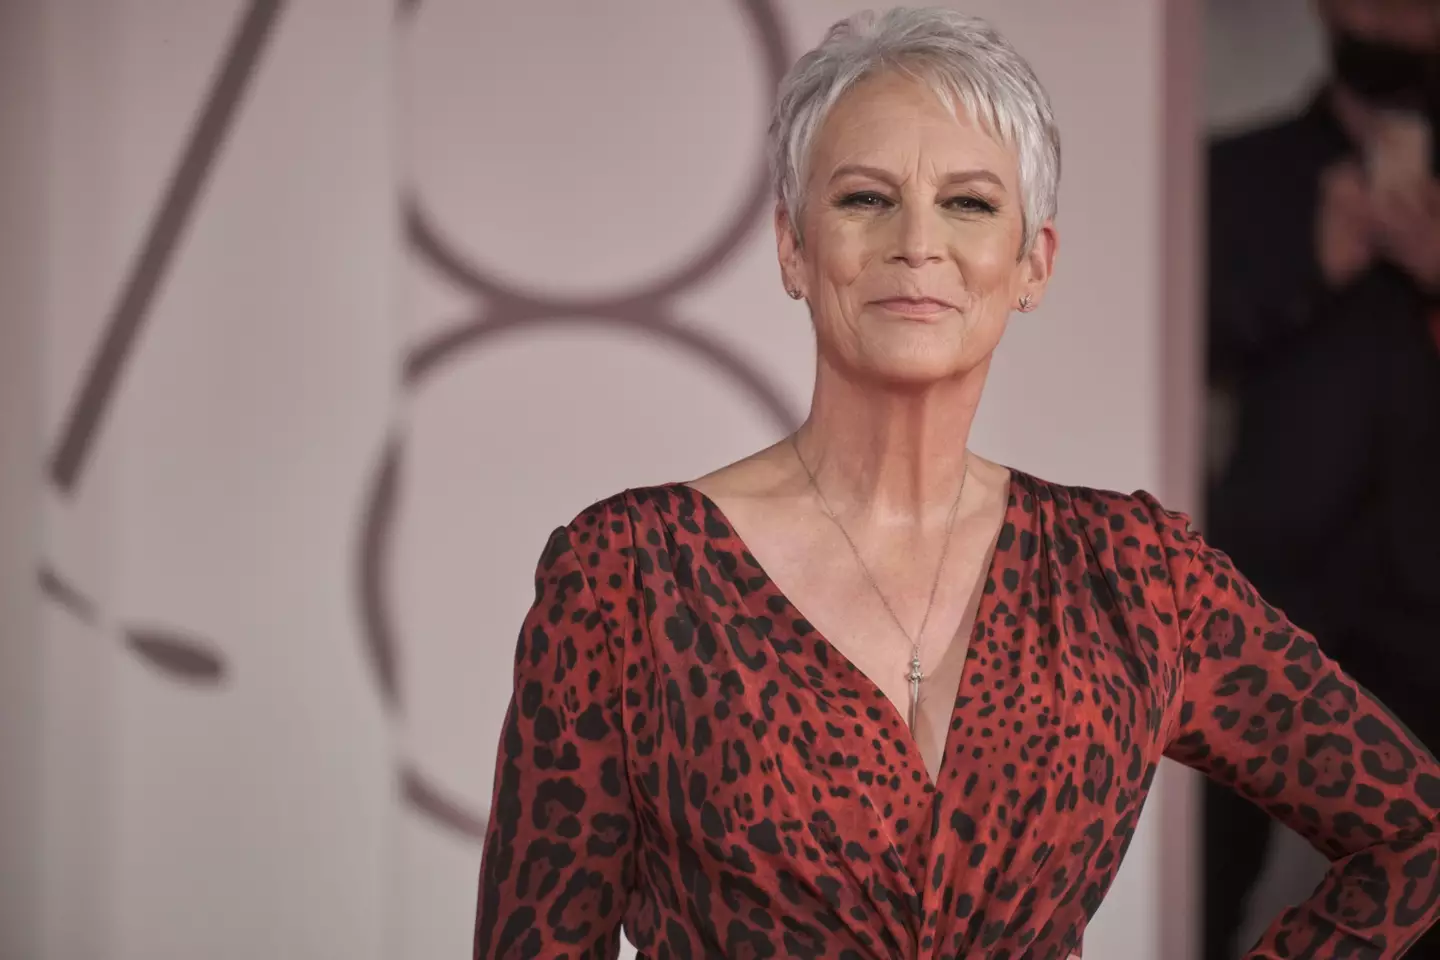 Jamie Lee Curtis was surprised about her nomination.